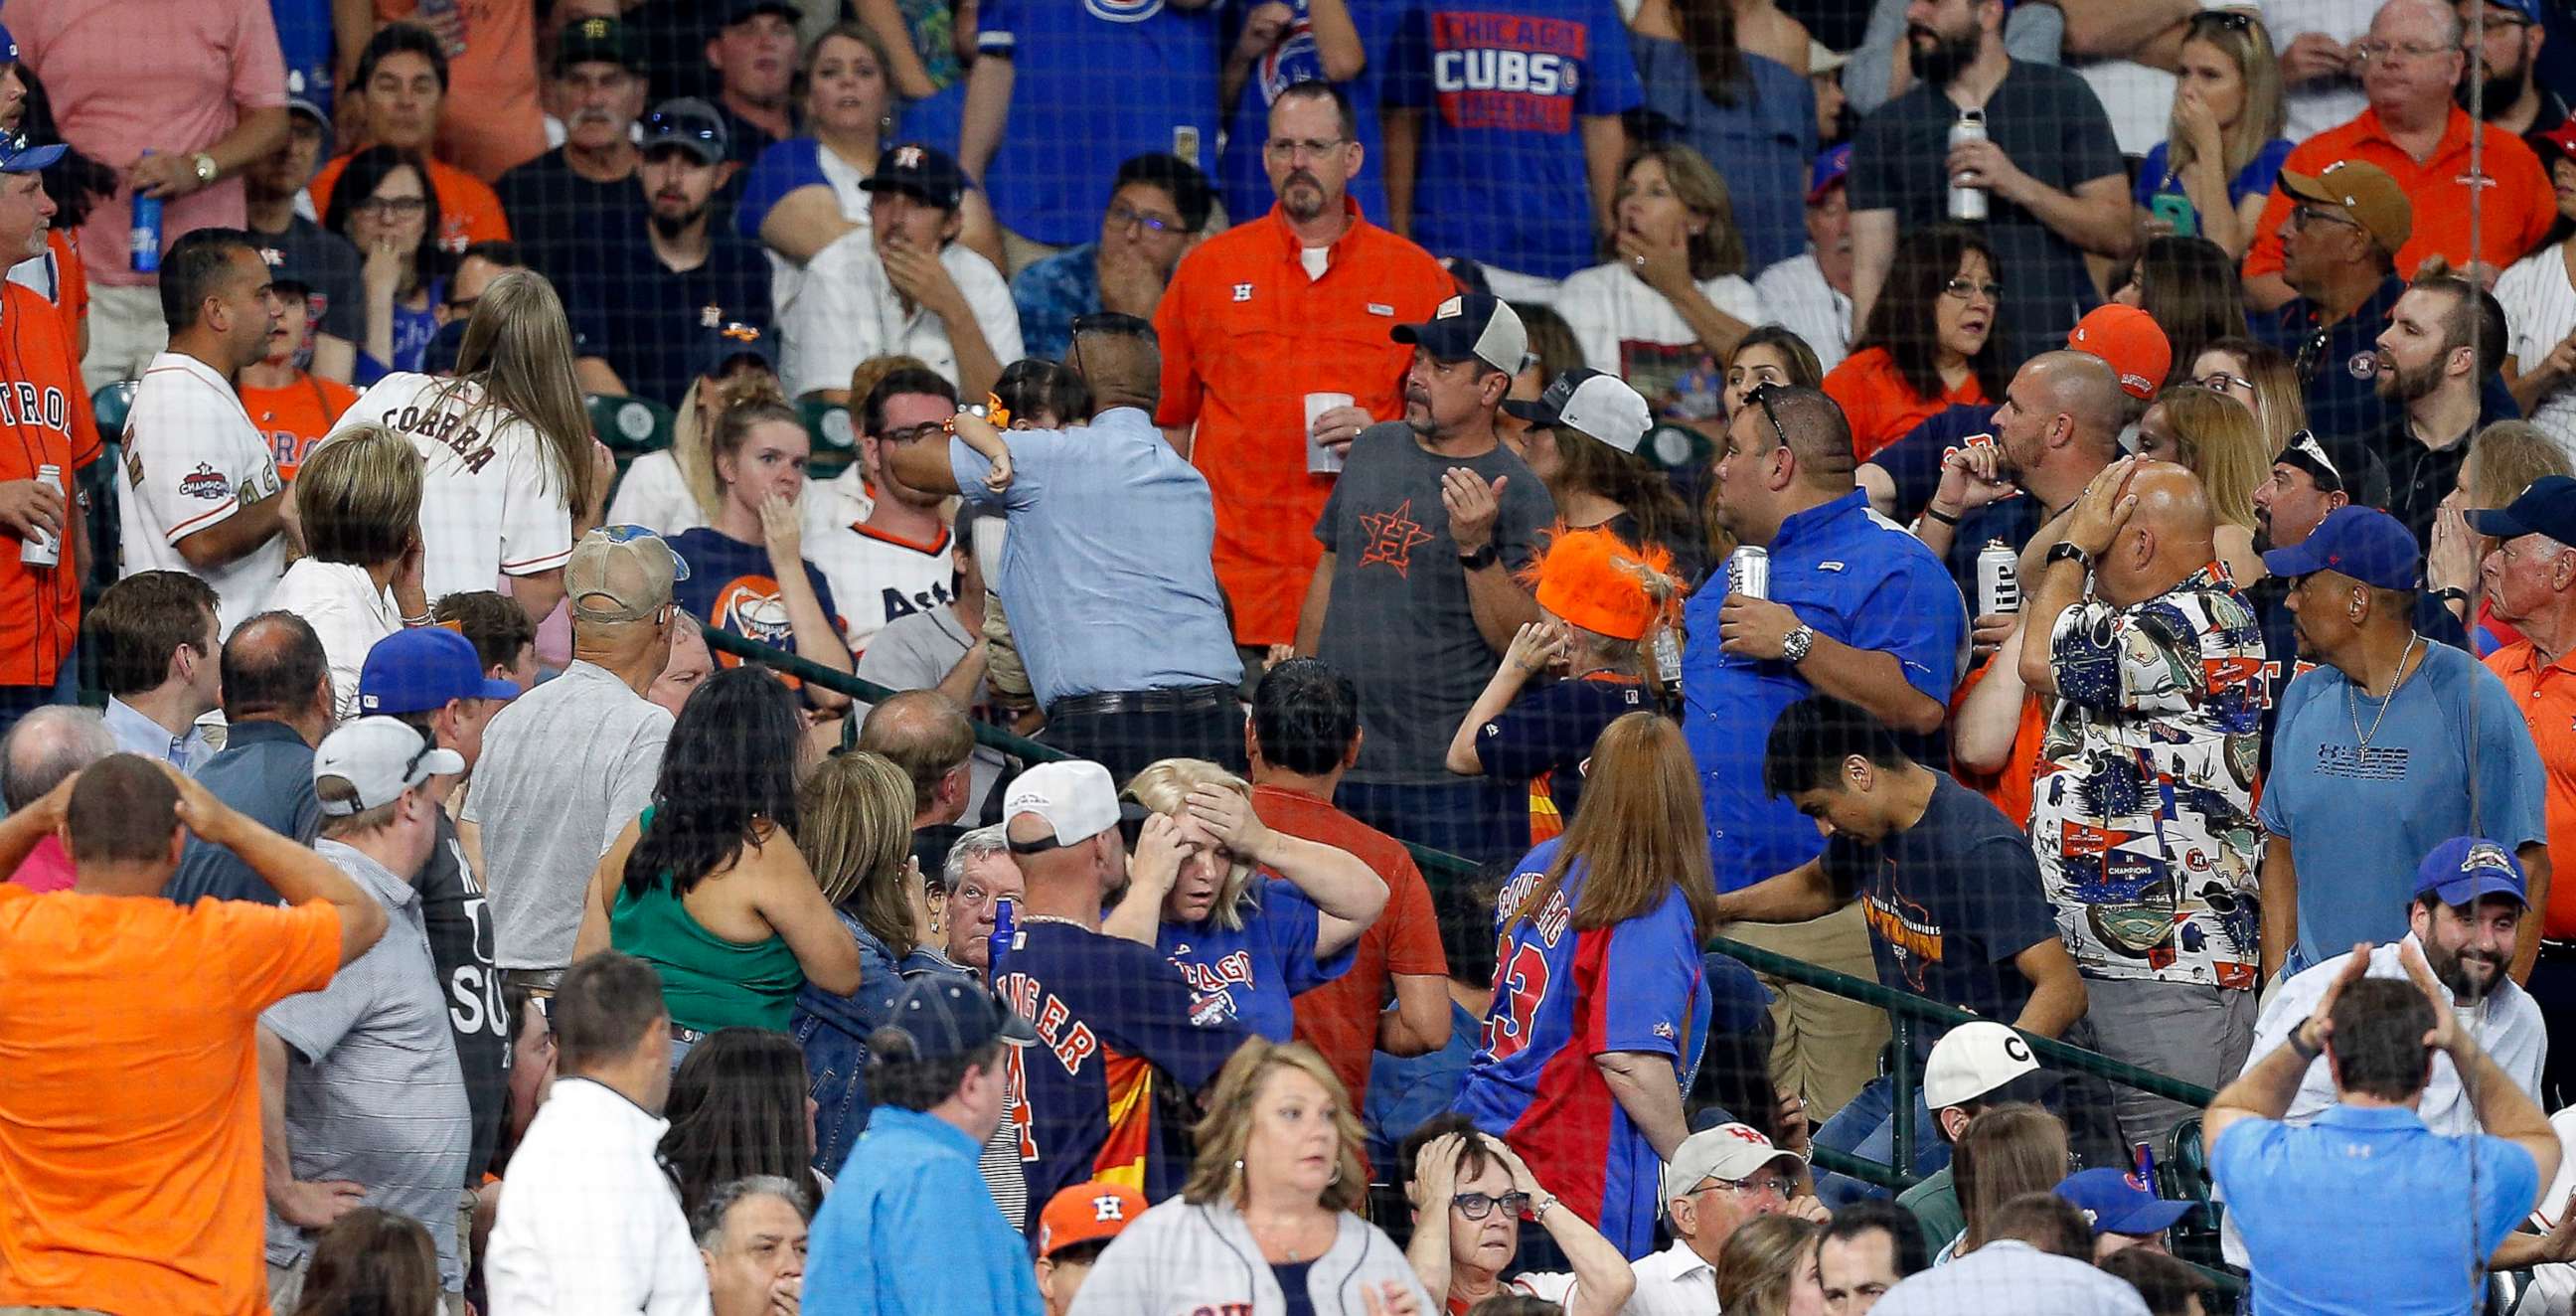 PHOTO: A young child is rushed from the stands after being injured by a hard foul ball off the bat of Albert Almora Jr. of the Chicago Cubs in the fourth inning at Minute Maid Park in Houston, May 29, 2019.